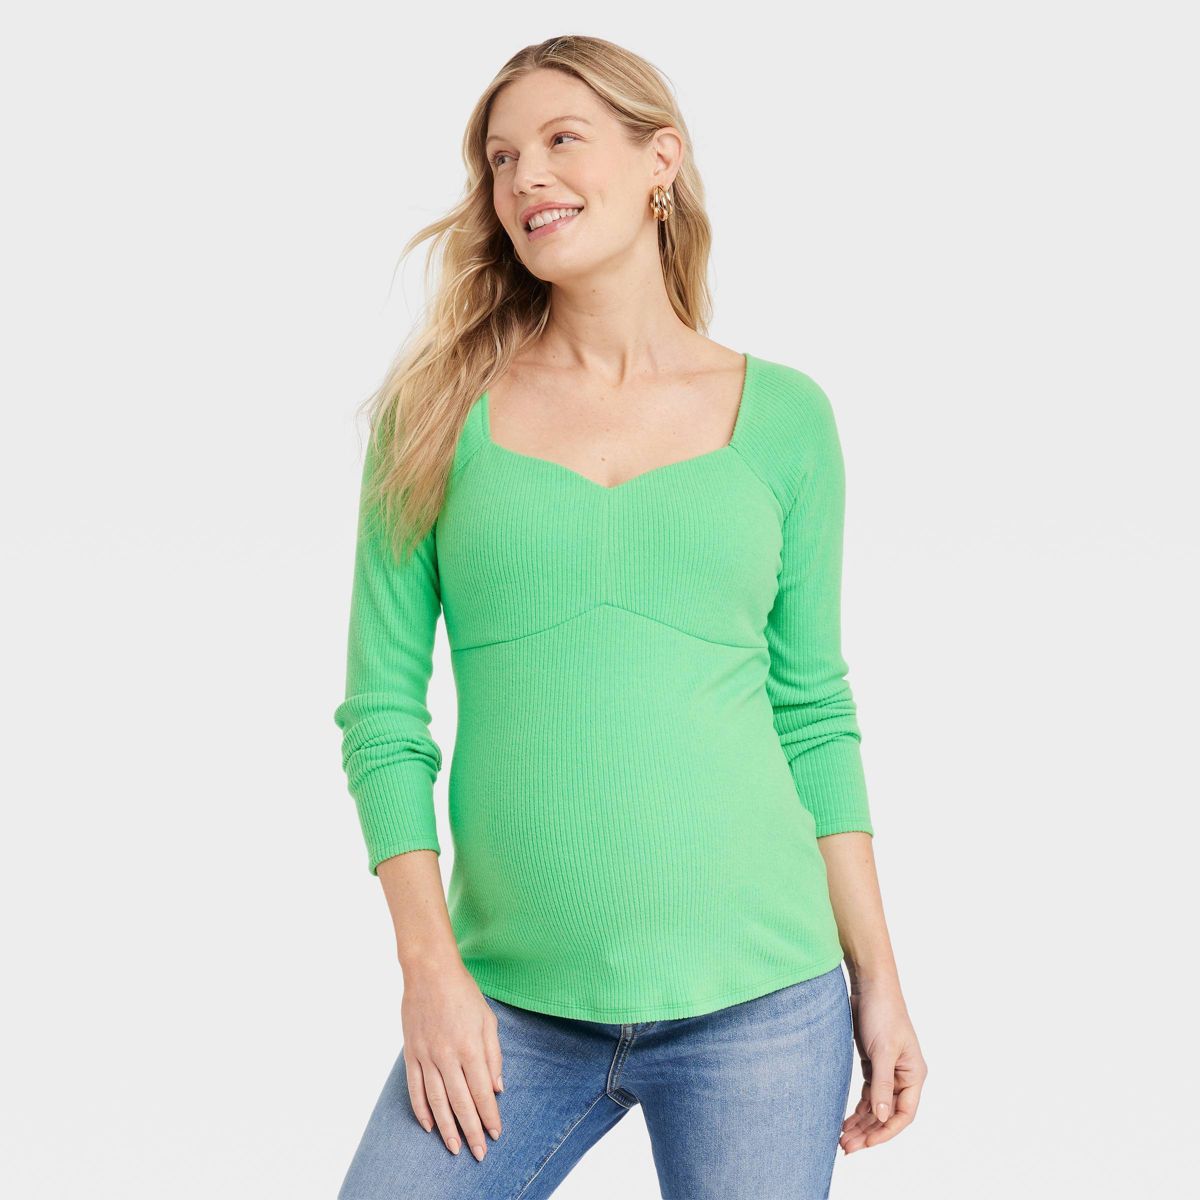 Corsetry Rib Maternity Top - Isabel Maternity by Ingrid & Isabel™ | Target